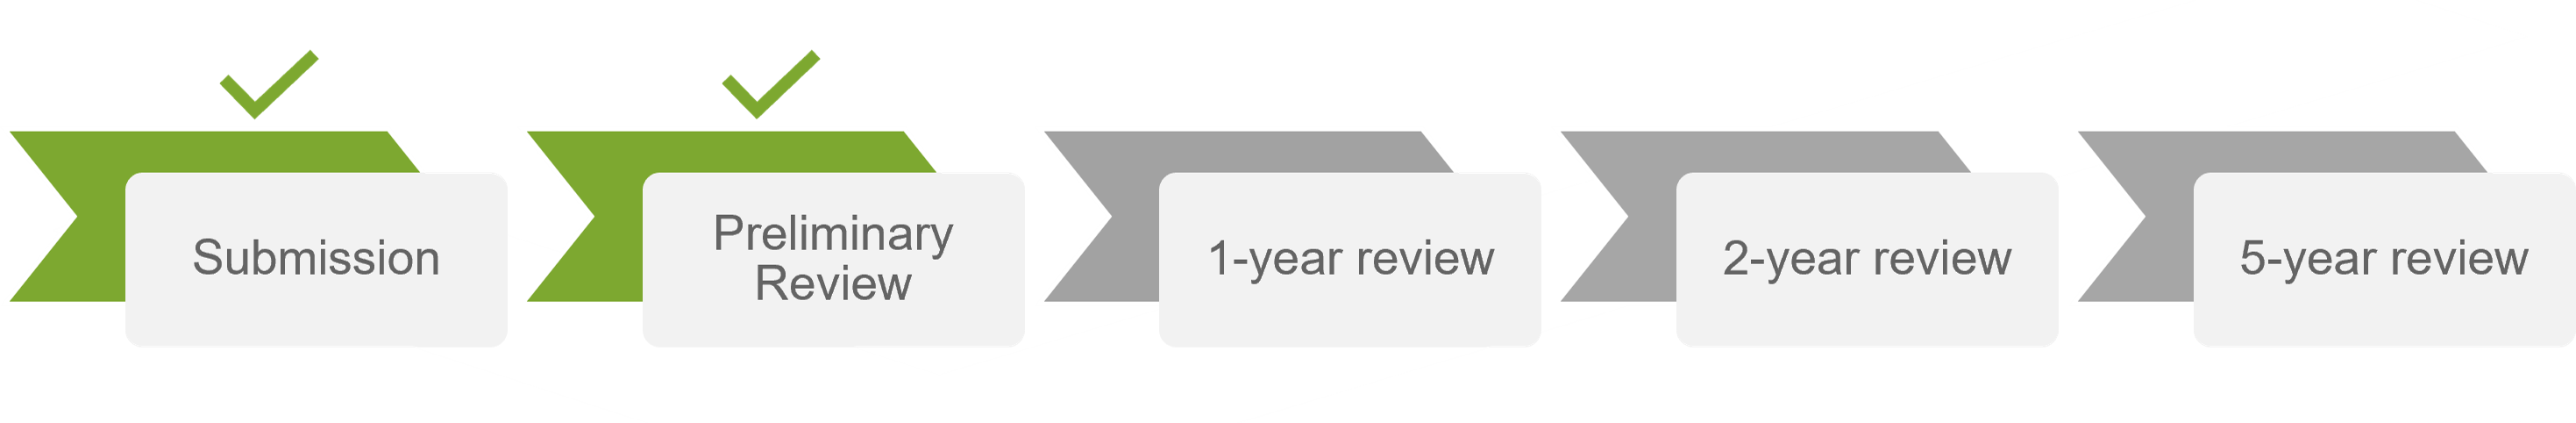 Arrows in a row: submission, preliminary, 1 year review, 2 year review, 5 year review. Indicates preliminary review complete